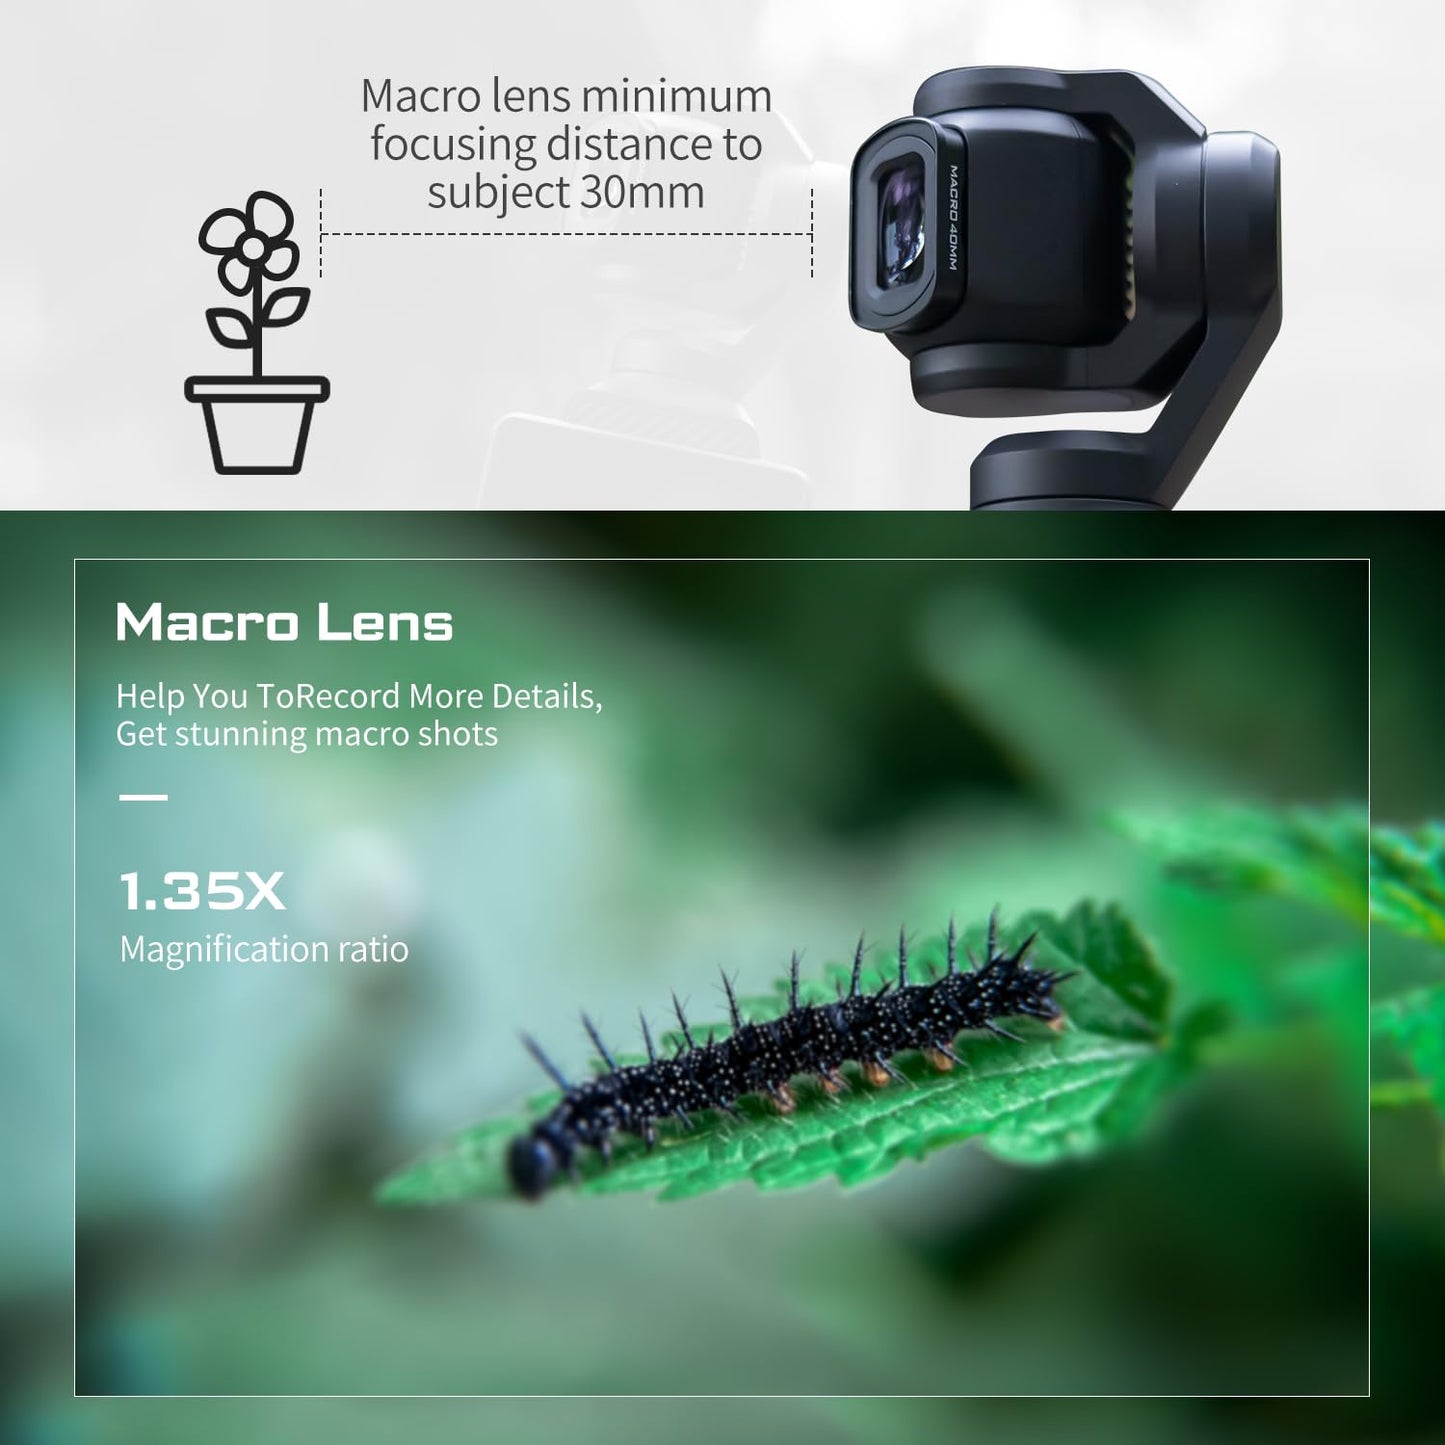 Freewell 2-in-1 Macro & Wide Angle Lens Kit for Pocket 3 - Includes Anamorphic Lens, ND Filters